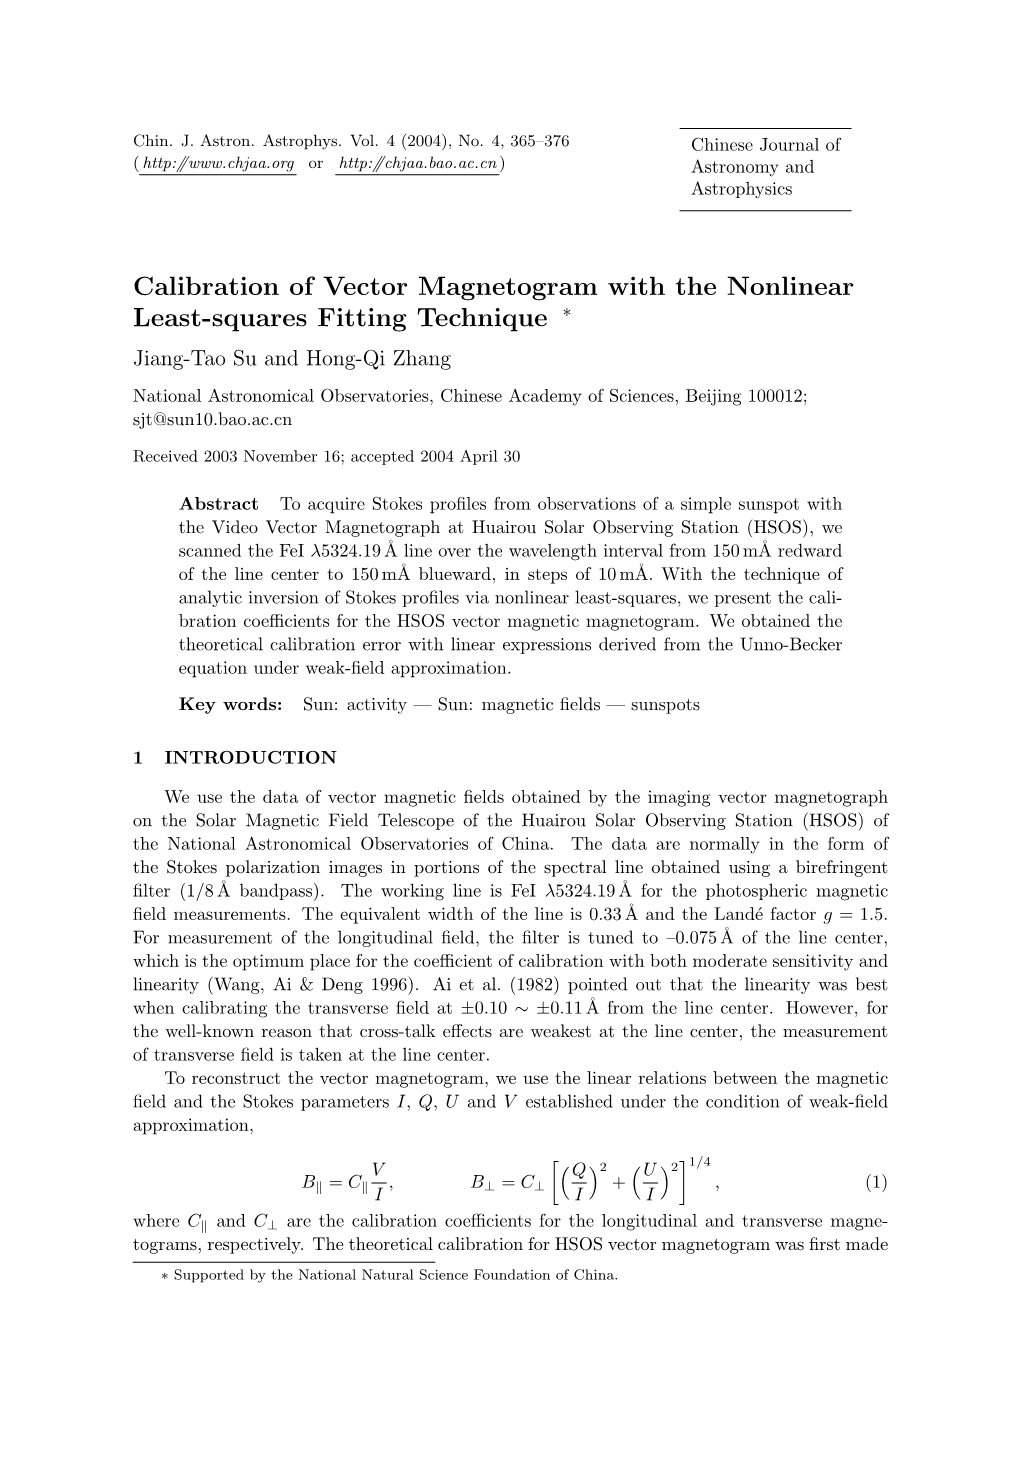 Calibration of Vector Magnetogram with the Nonlinear Least-Squares Fitting Technique